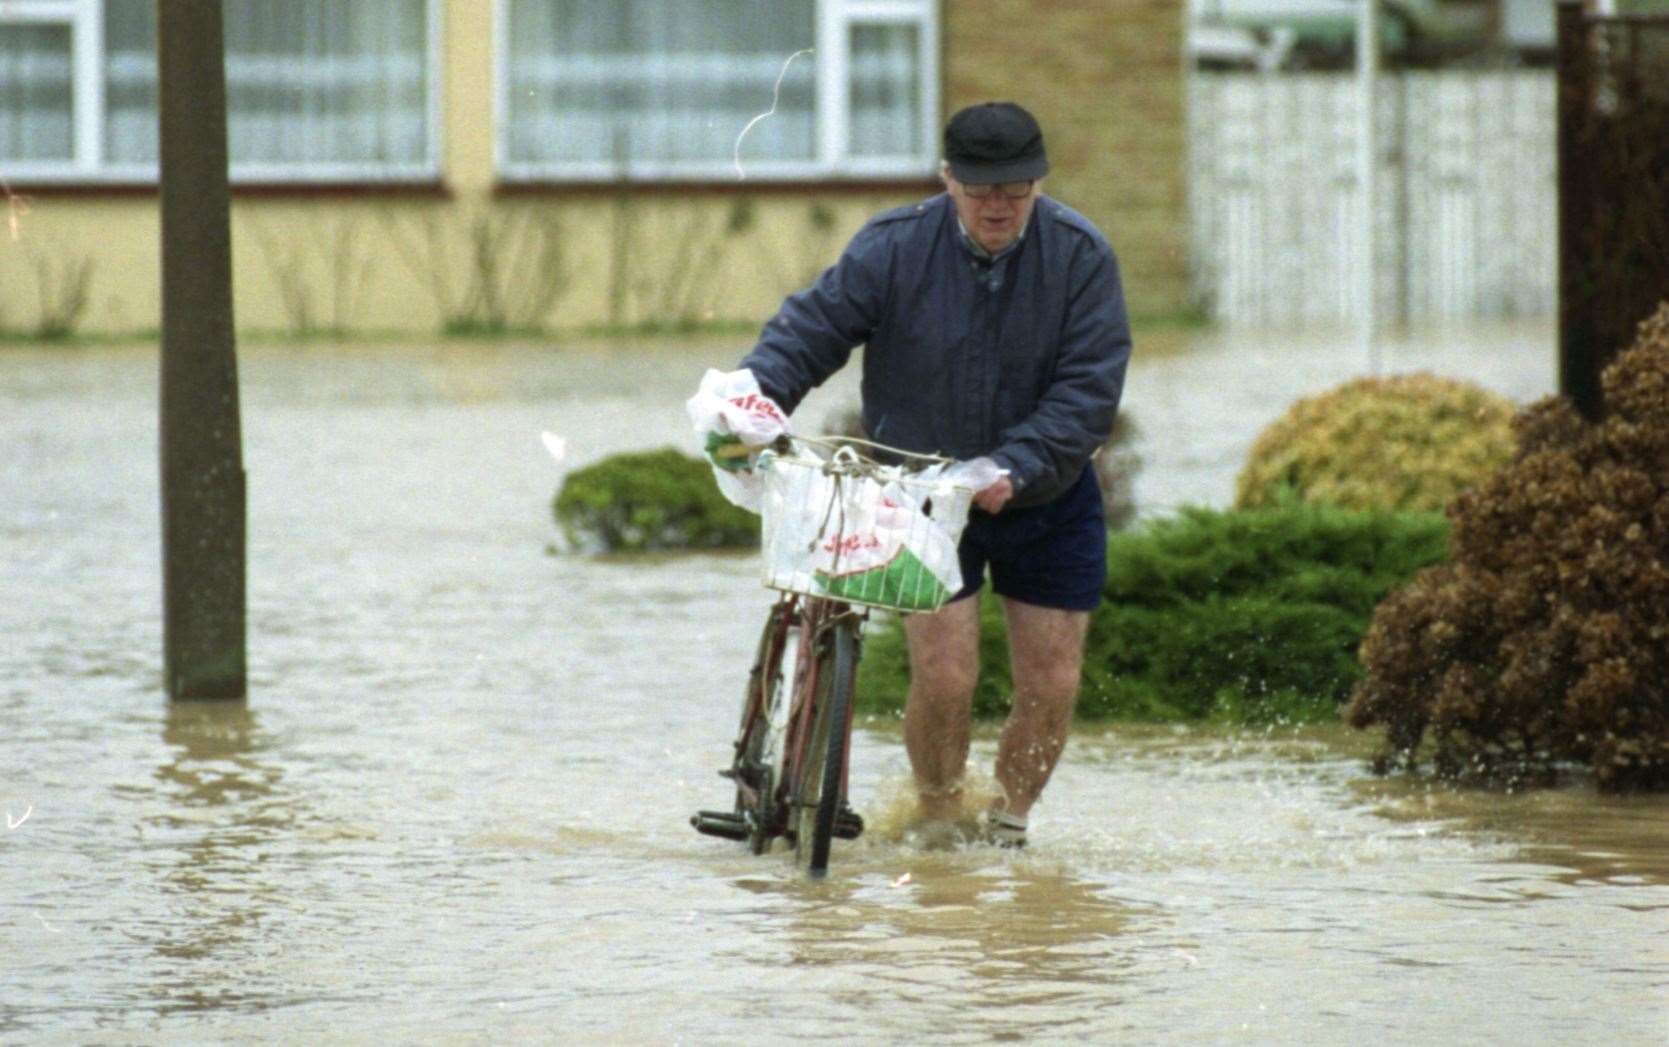 A resident making his way through Cherry Gardens, Herne Bay, with his bike